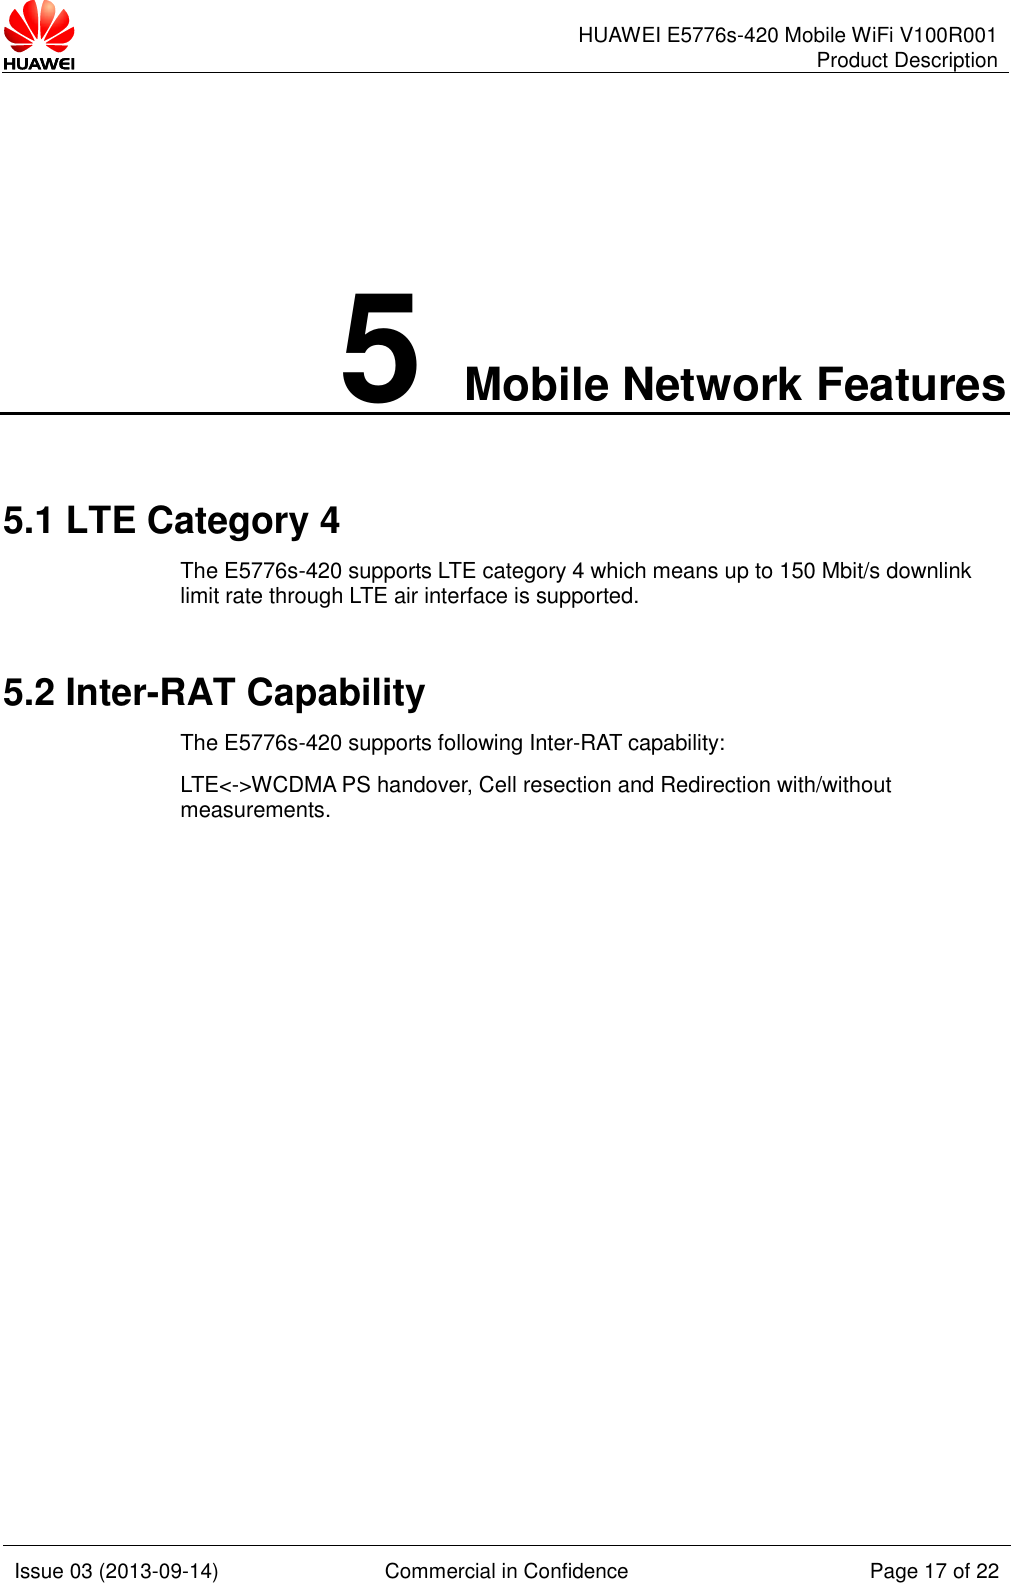      HUAWEI E5776s-420 Mobile WiFi V100R001 Product Description    Issue 03 (2013-09-14) Commercial in Confidence Page 17 of 22  5 Mobile Network Features 5.1 LTE Category 4 The E5776s-420 supports LTE category 4 which means up to 150 Mbit/s downlink limit rate through LTE air interface is supported. 5.2 Inter-RAT Capability The E5776s-420 supports following Inter-RAT capability: LTE&lt;-&gt;WCDMA PS handover, Cell resection and Redirection with/without measurements.